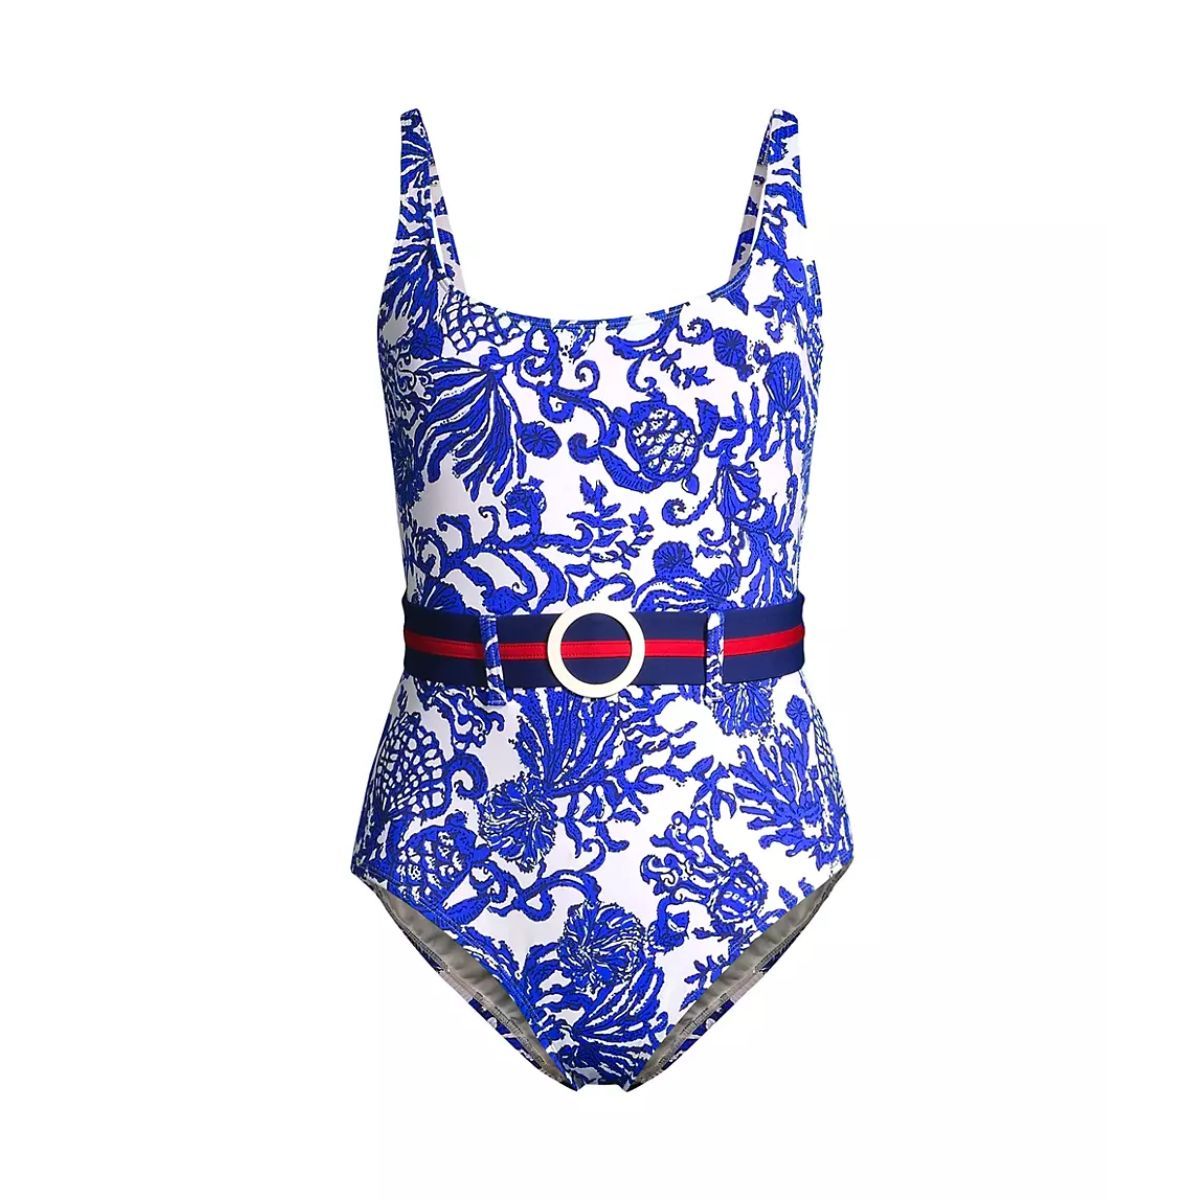 Blue-and-white porcelain One Piece Swimsuit